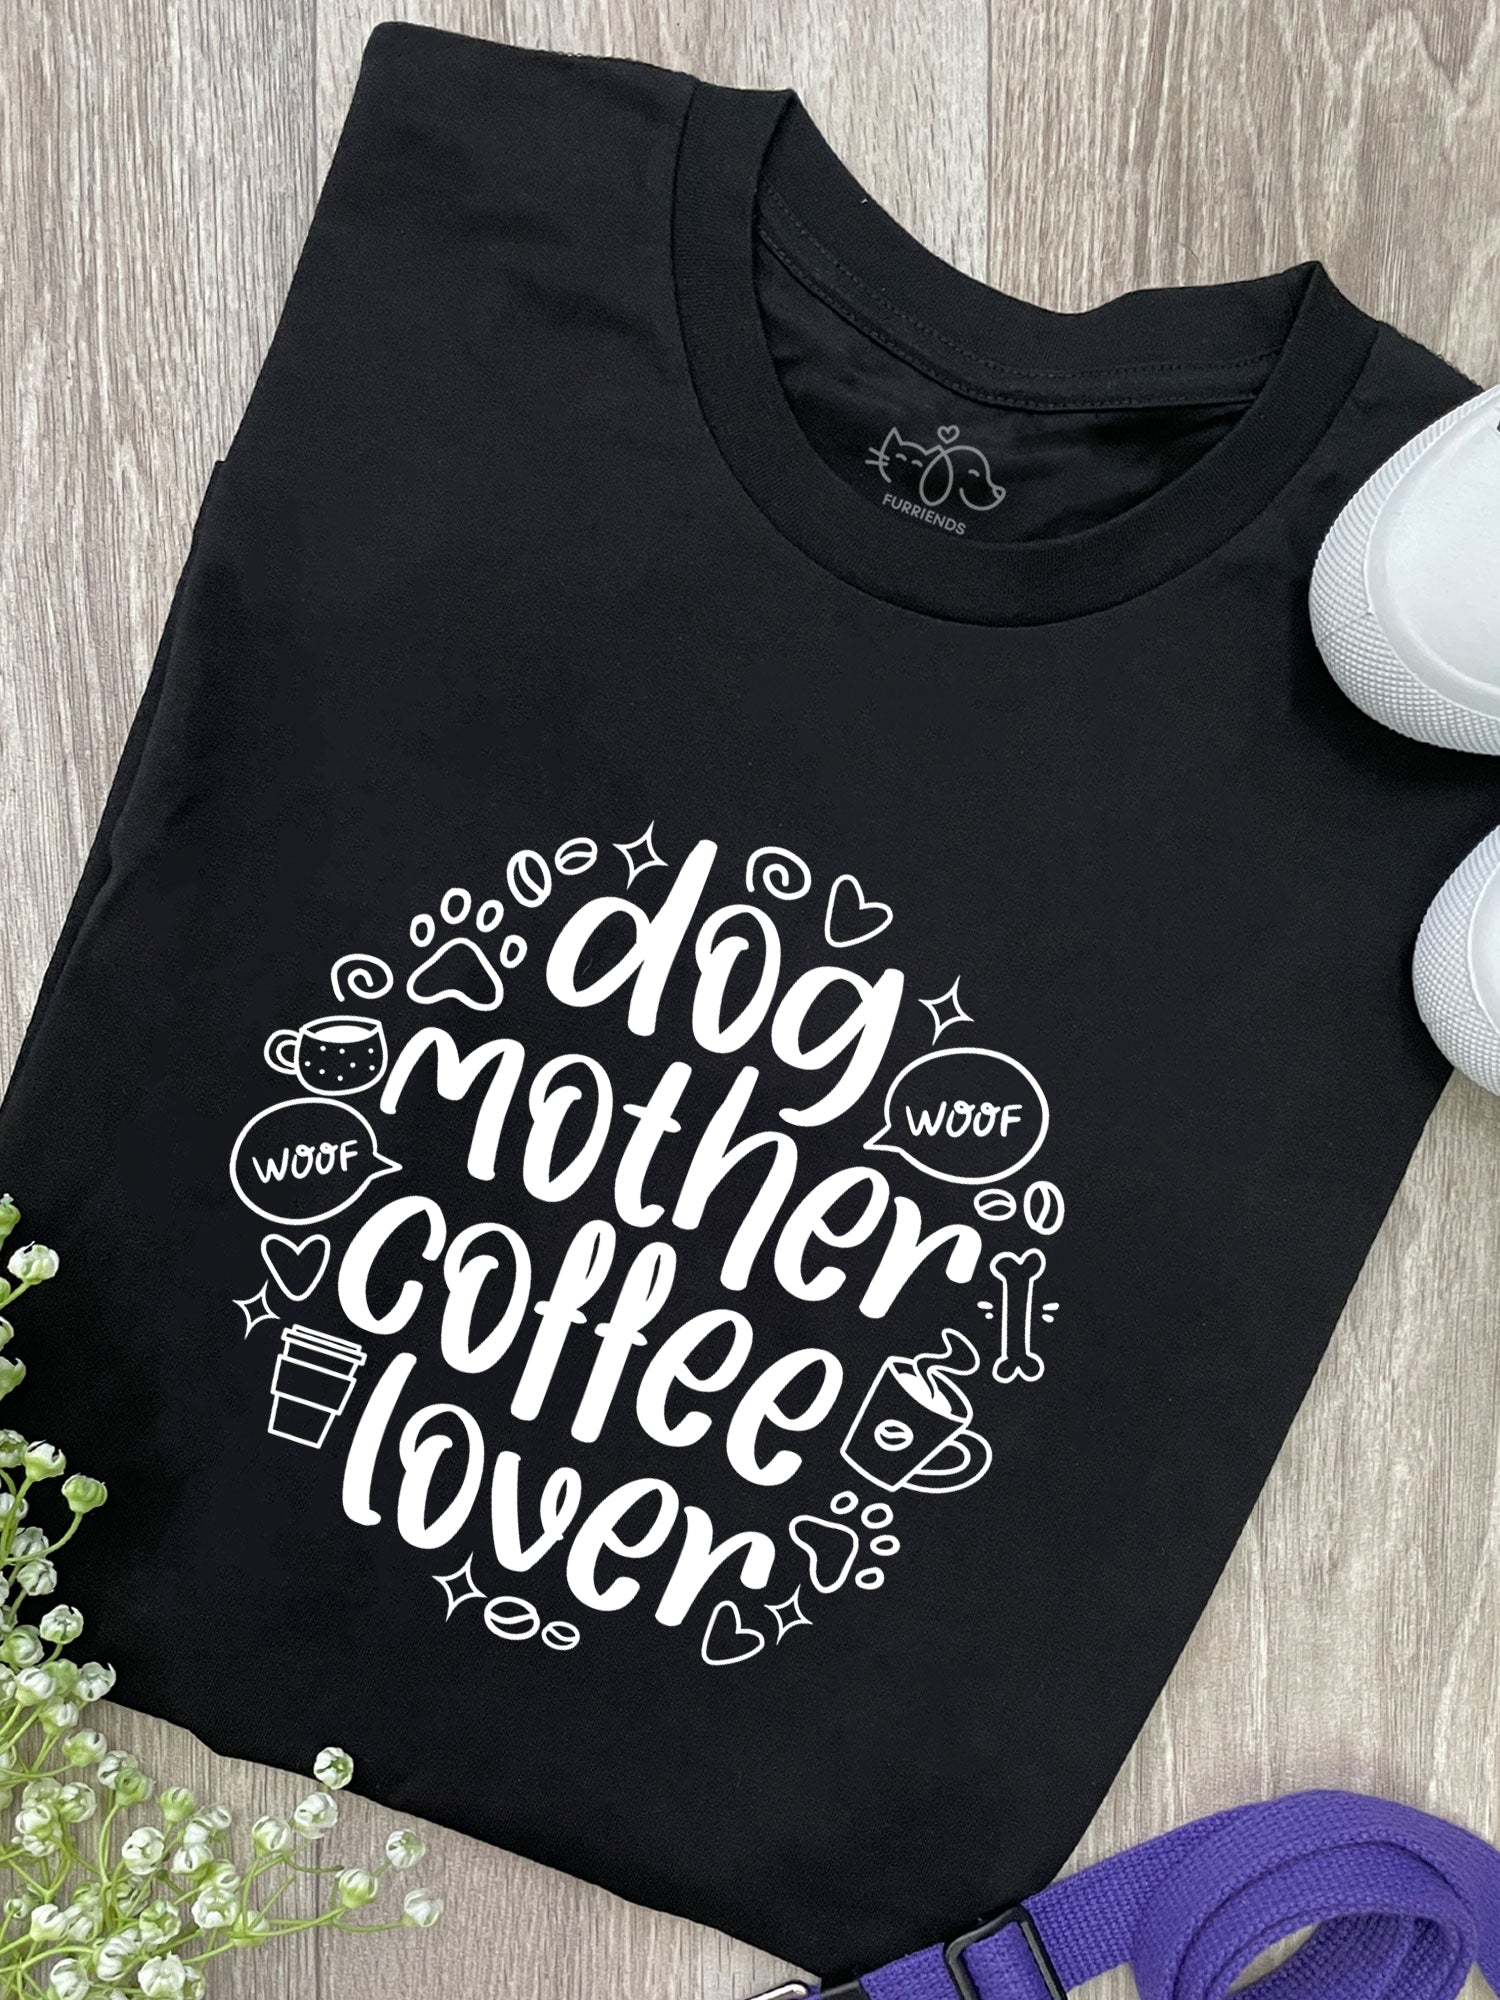 Dog Mother, Coffee Lover